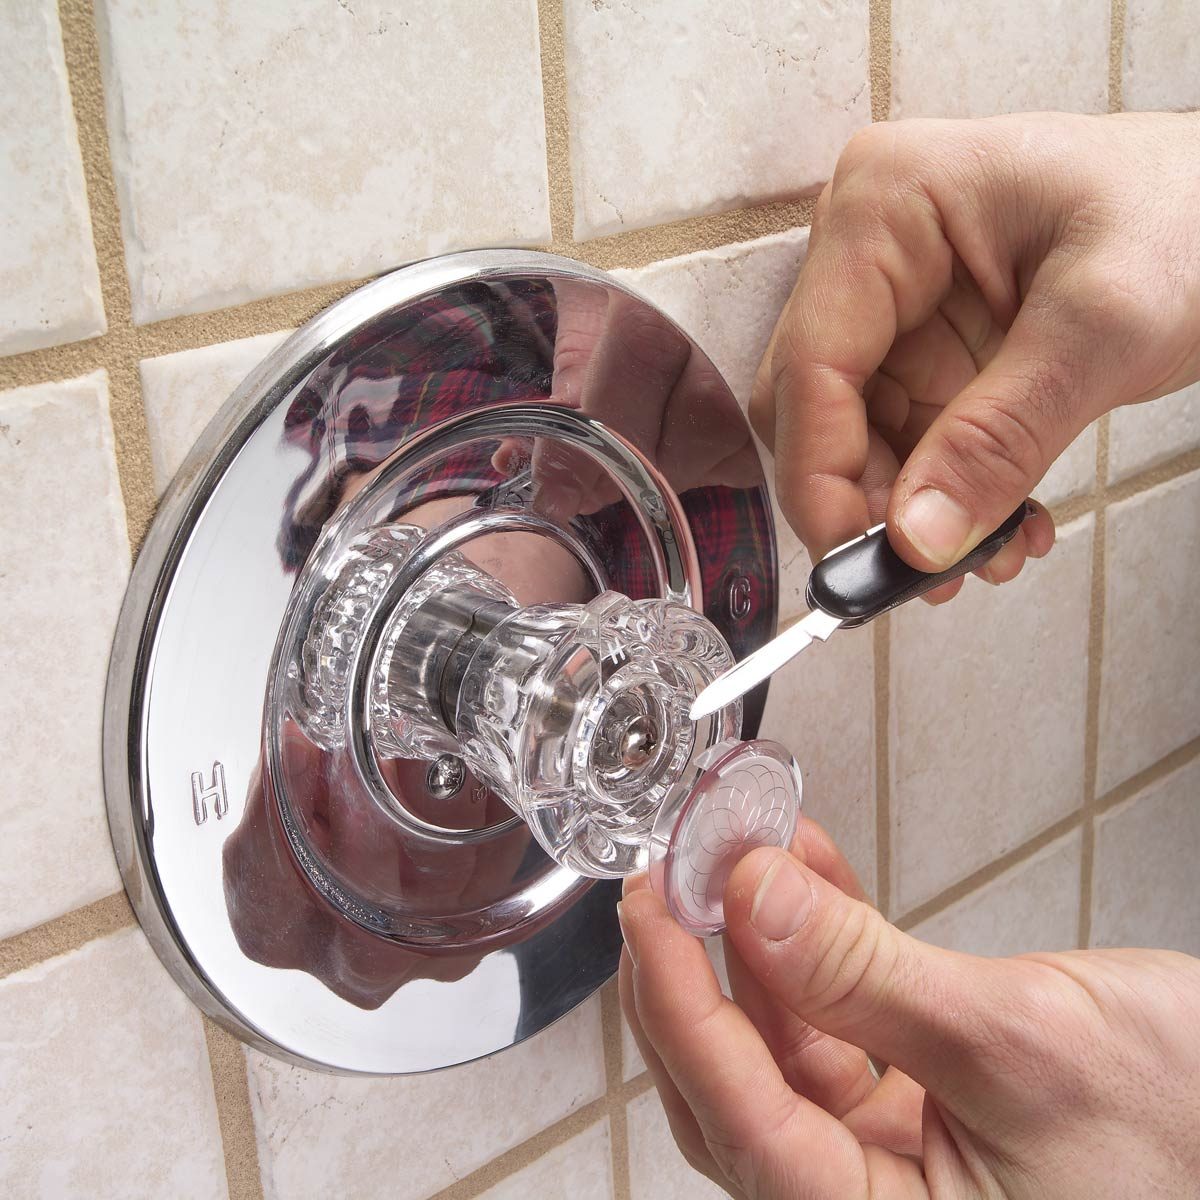 Shower Faucet Leaking? Here's How to Fix It